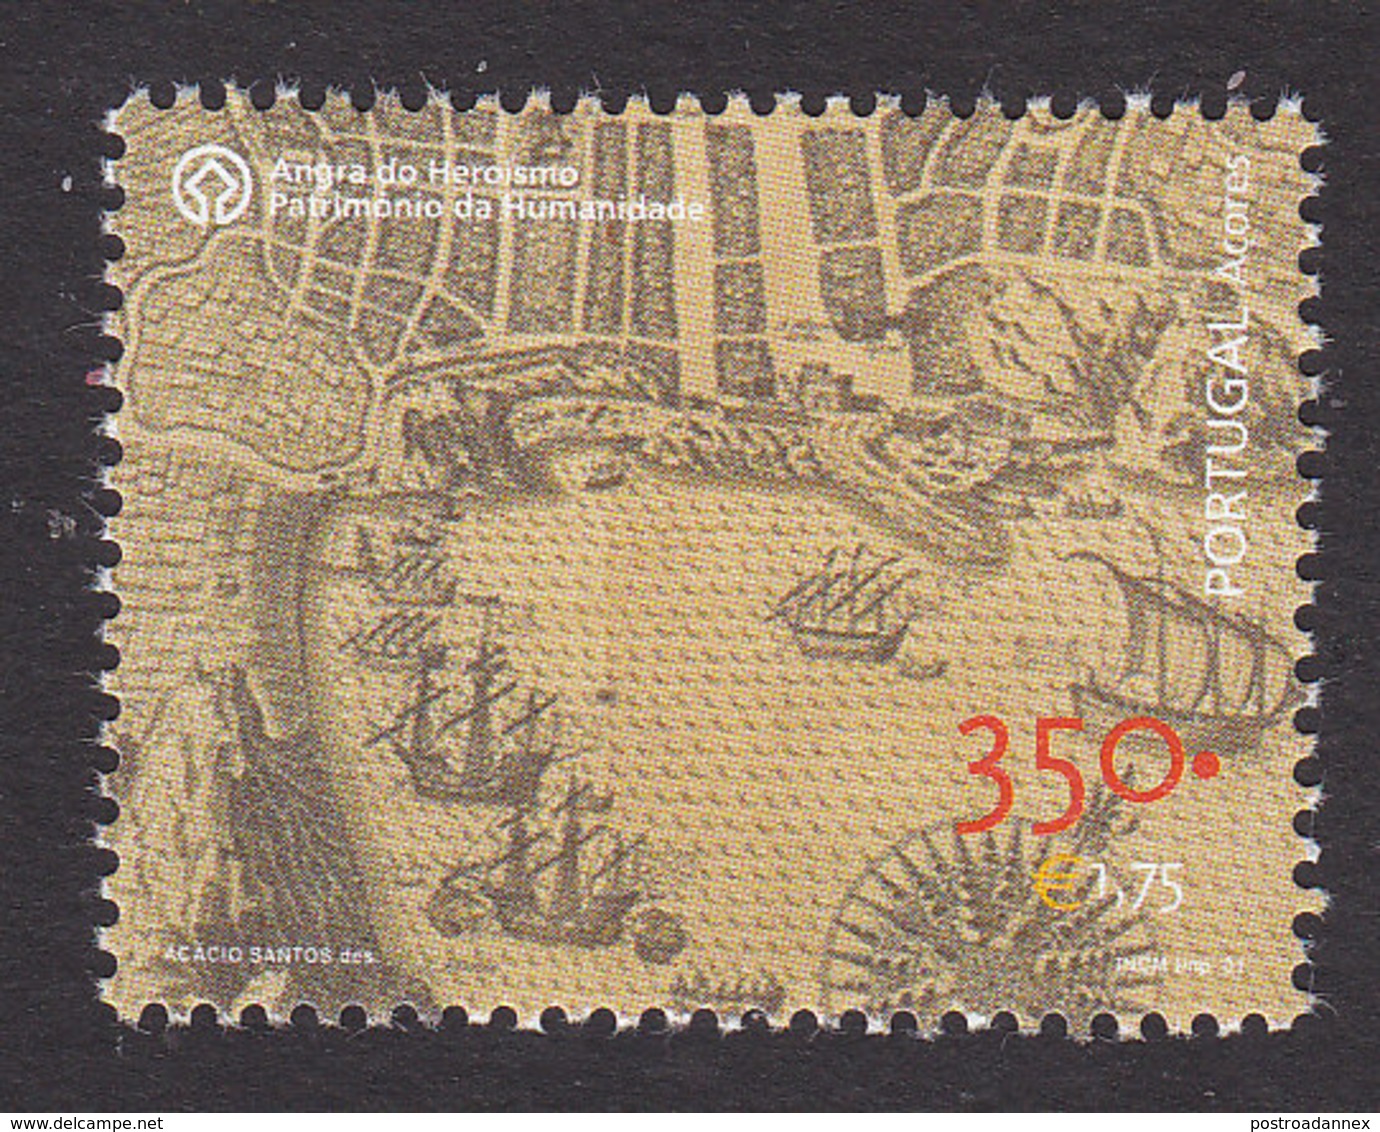 Azores, Scott #462 Single From Souvenir Sheet, Mint Never Hinged, Map, Issued 2001 - Açores